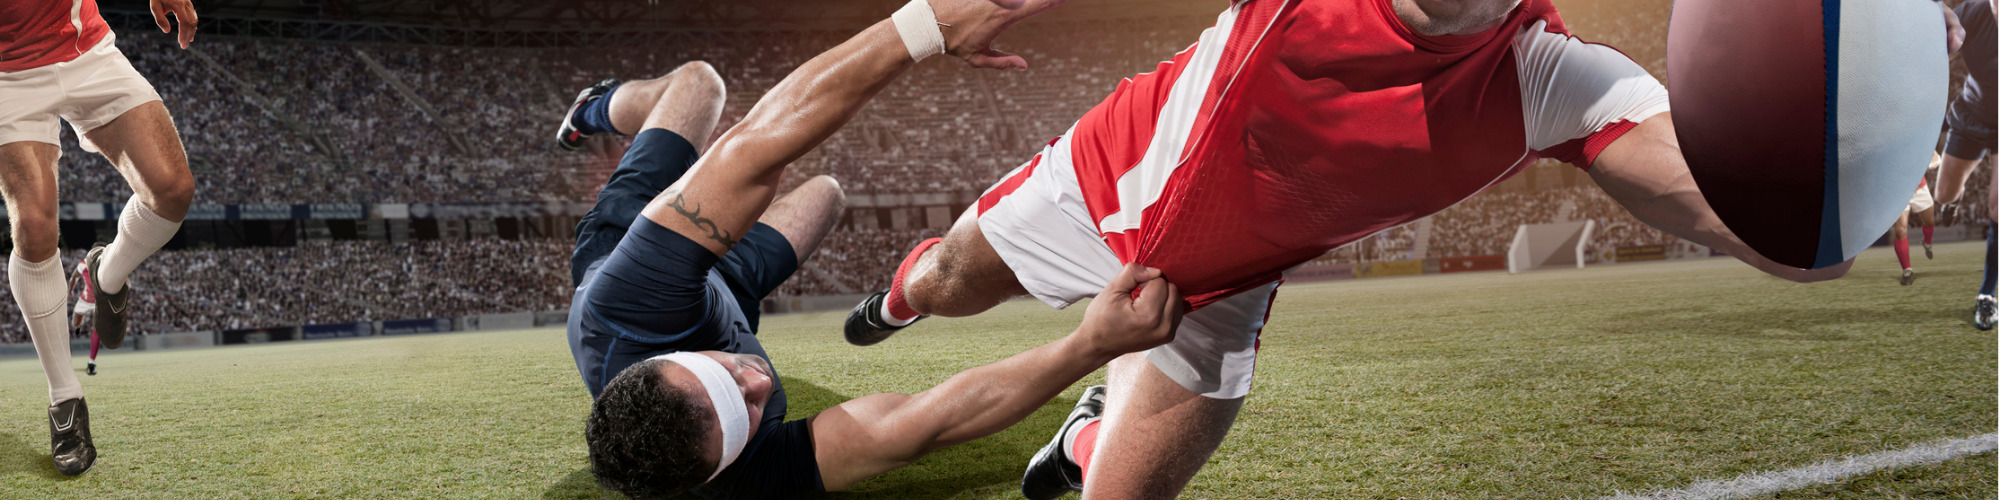 Head Injuries in Sport - Issues, Risks & Considerations